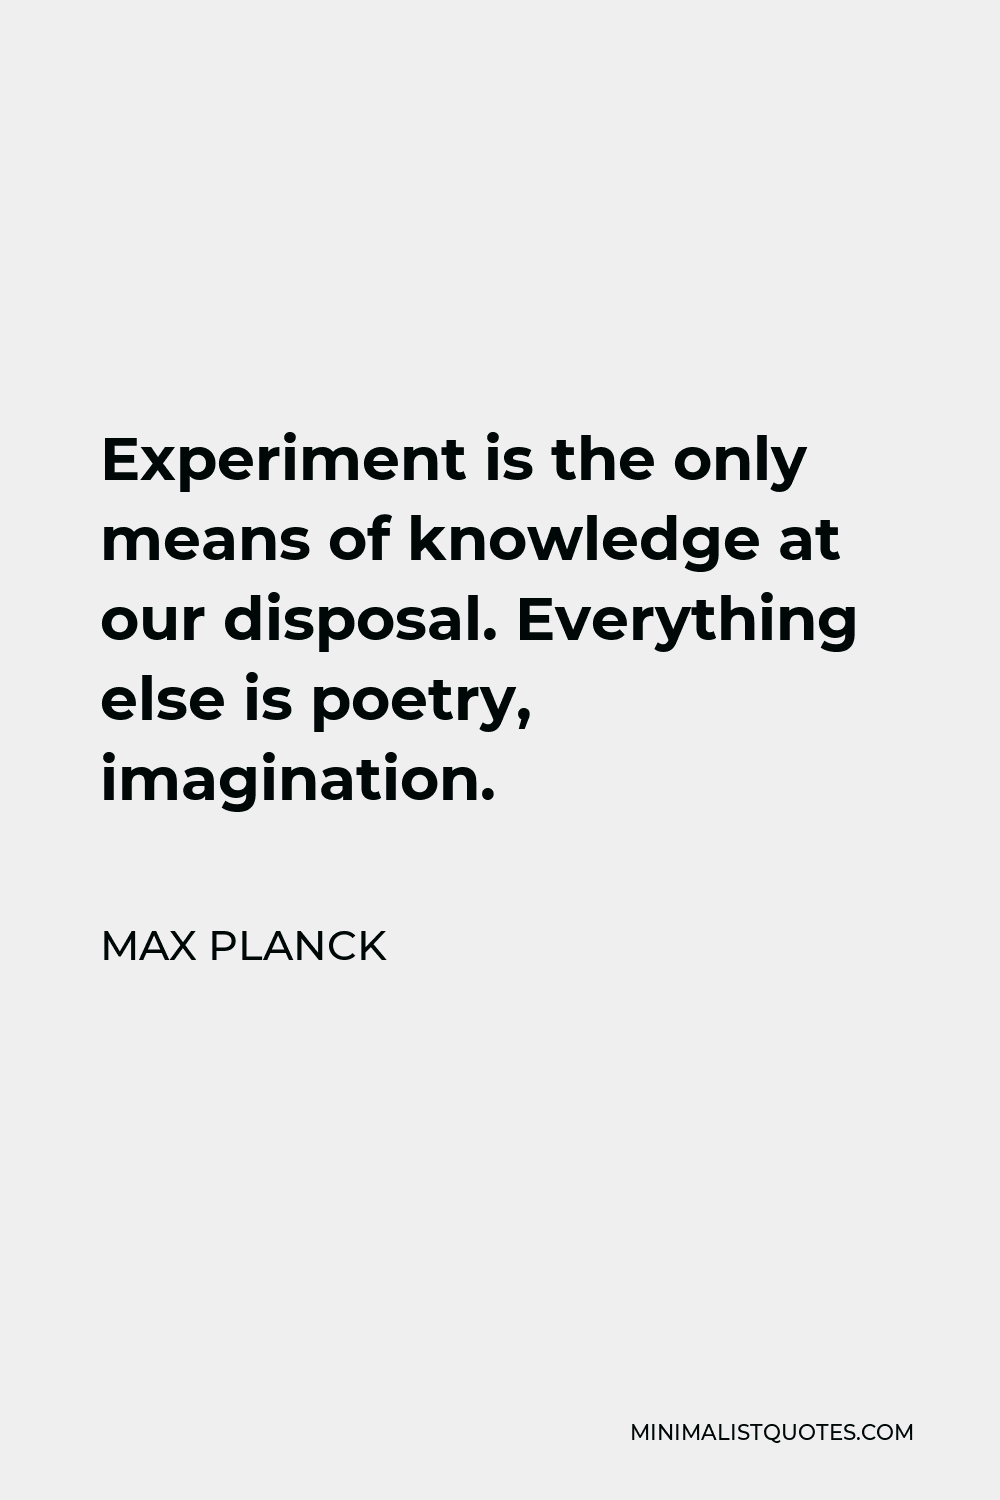 Max Planck Quote - Experiment is the only means of knowledge at our disposal. Everything else is poetry, imagination.